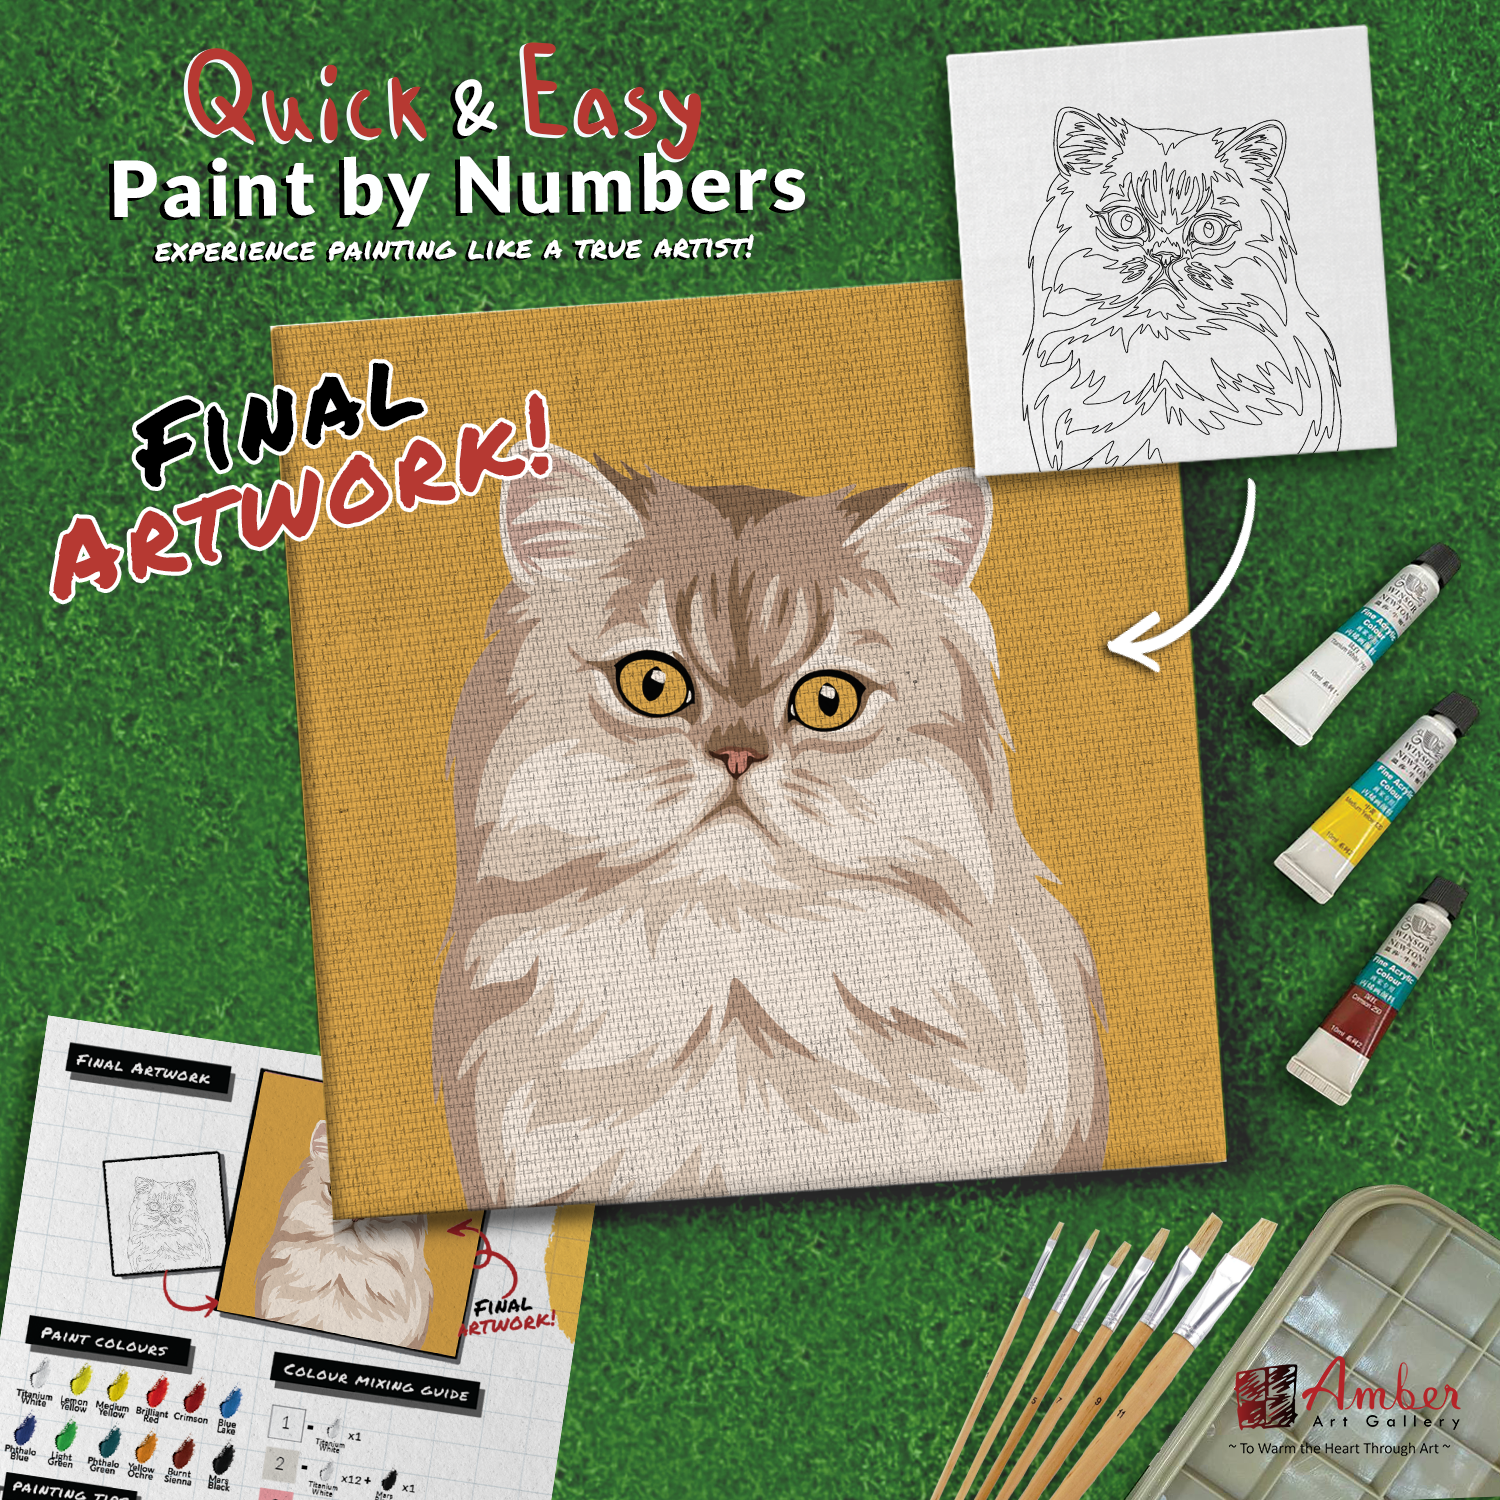 paint-by-numbers-painting-kit-cat-persian-cat